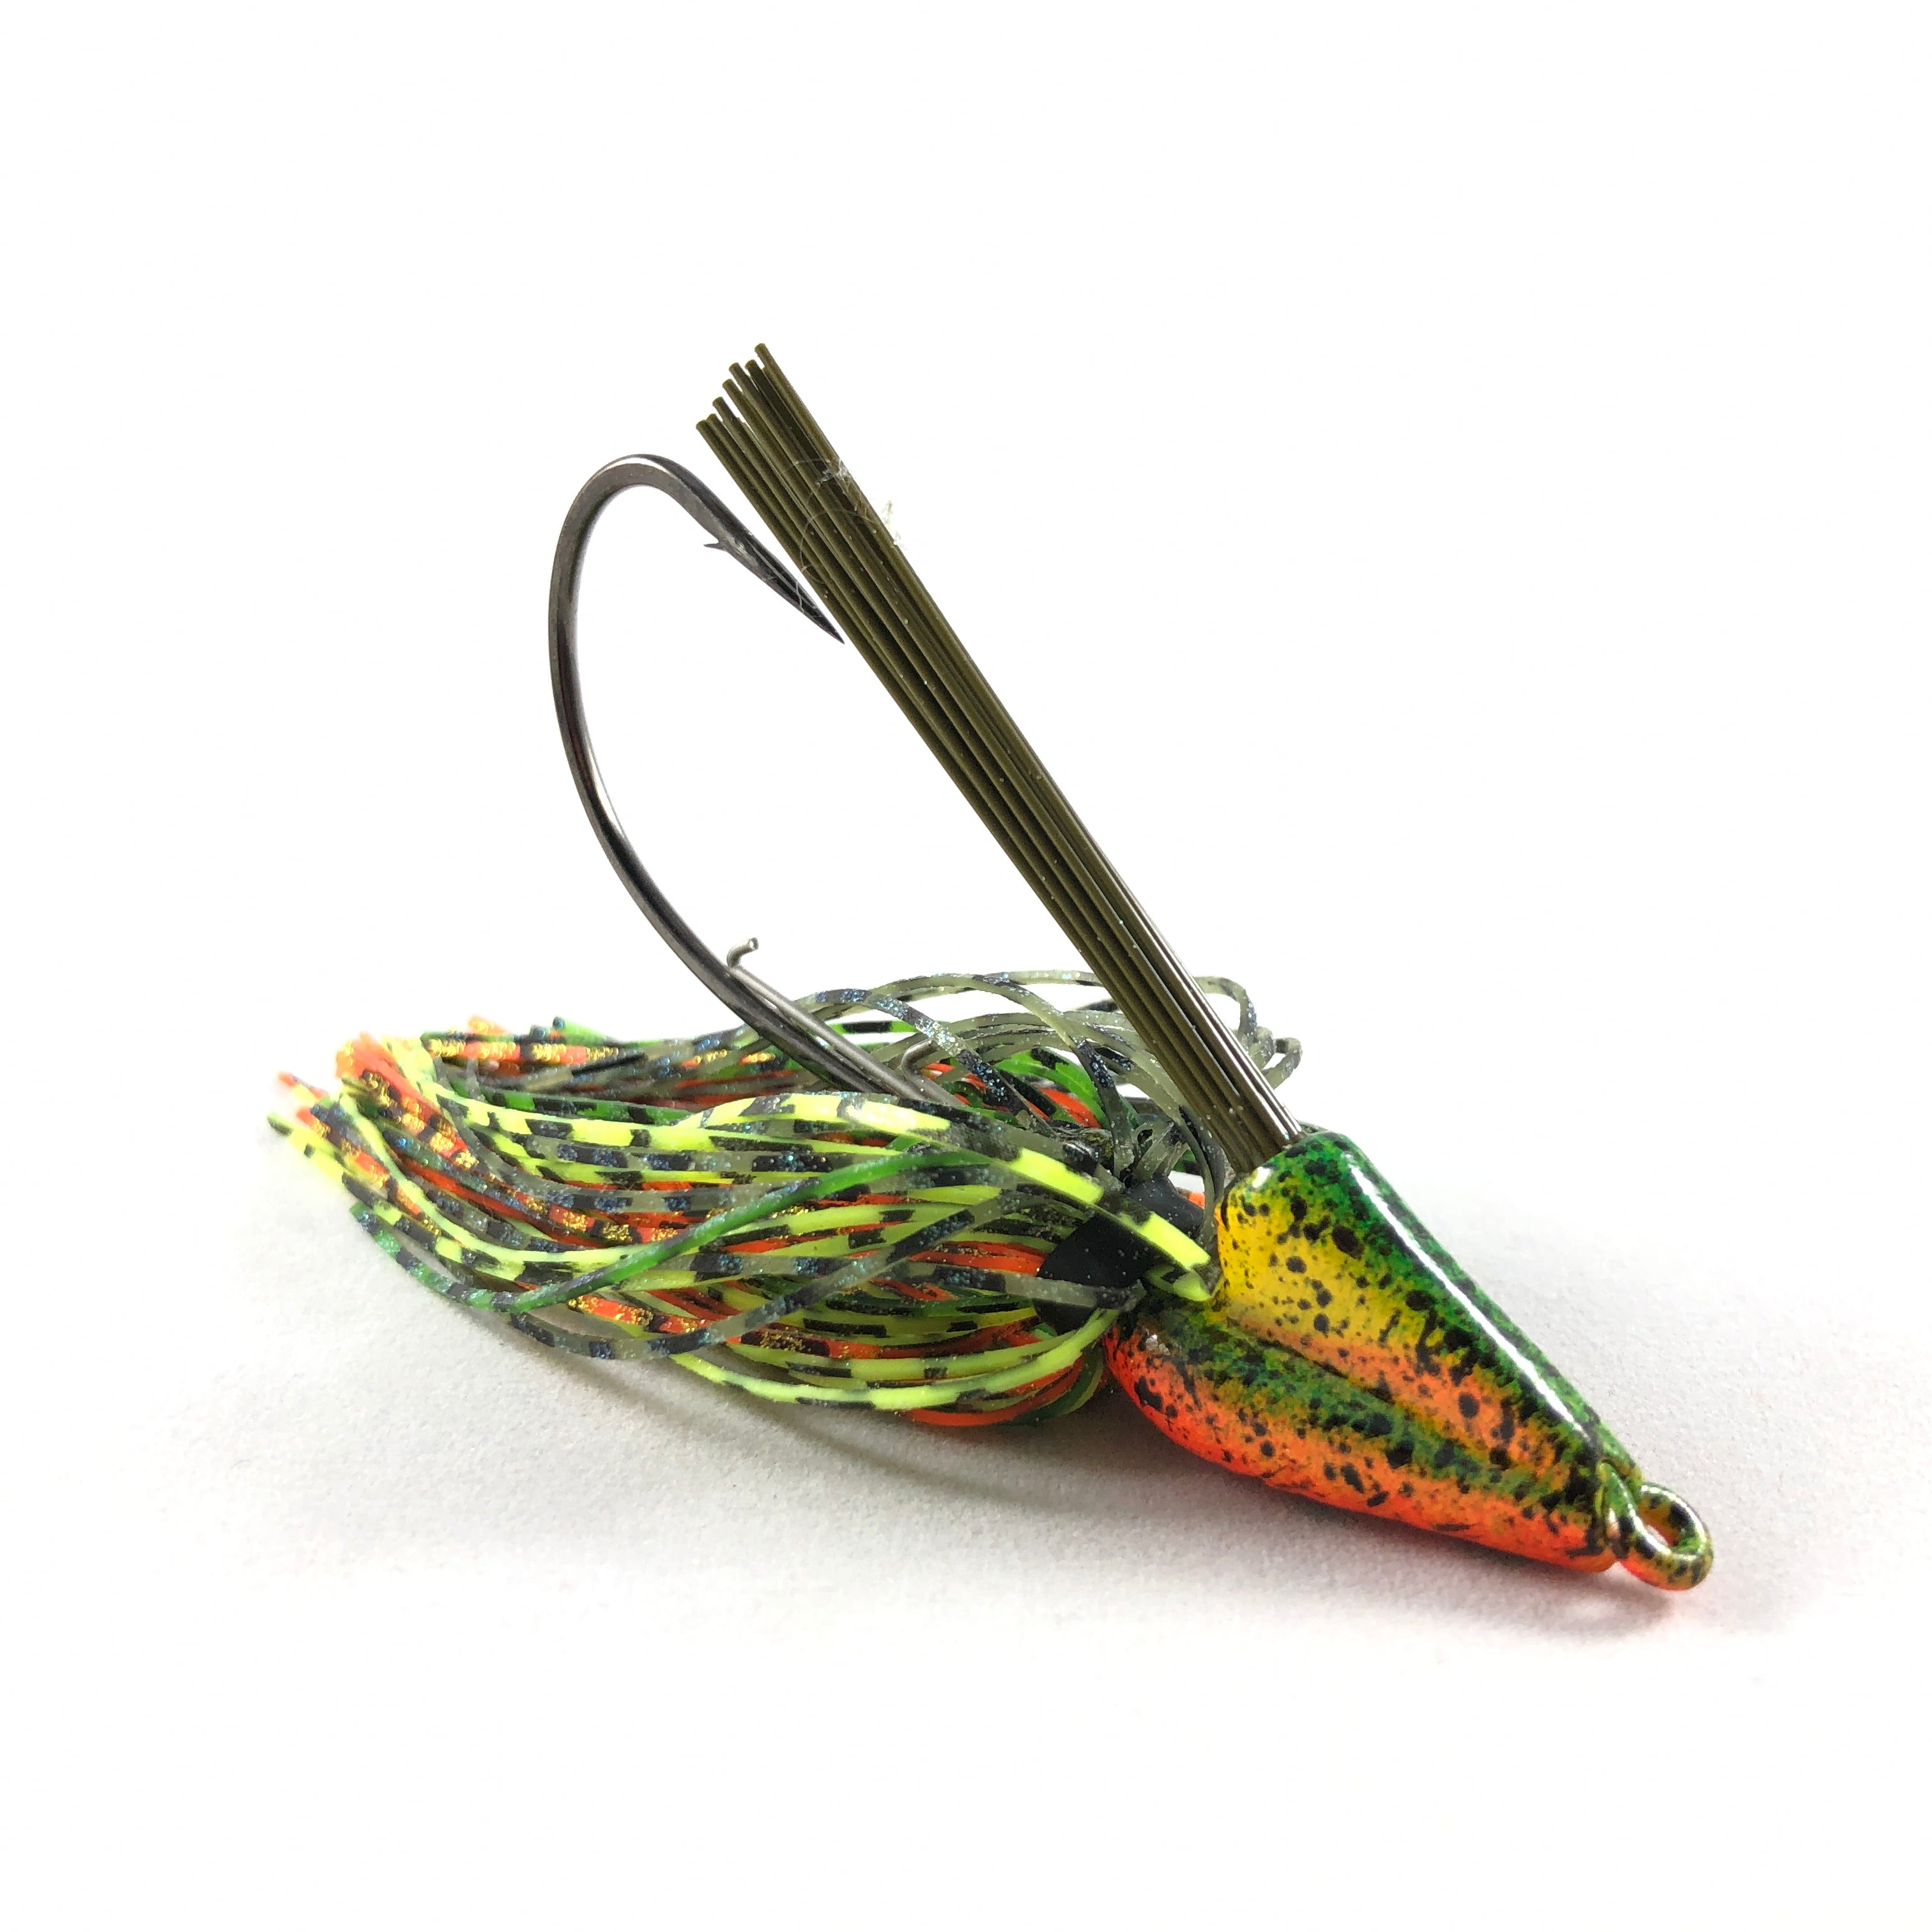 Toss the Versatile 'Flipping Jig' for More and Bigger Bass